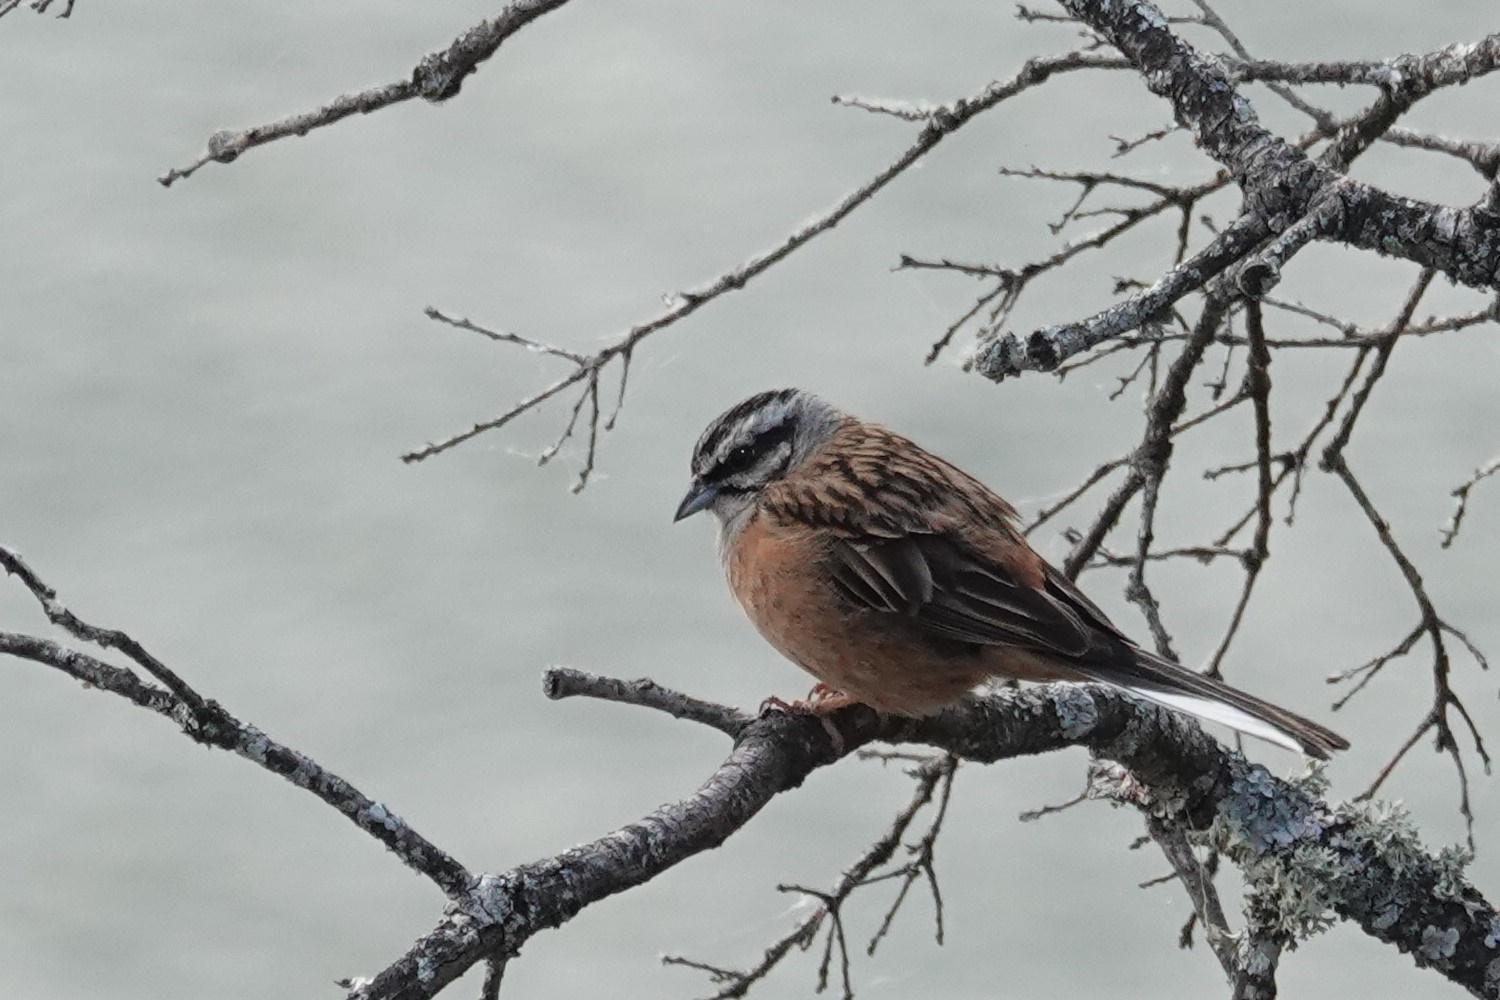 Rock Bunting Photo by Bonnie Clarfield-Bylin